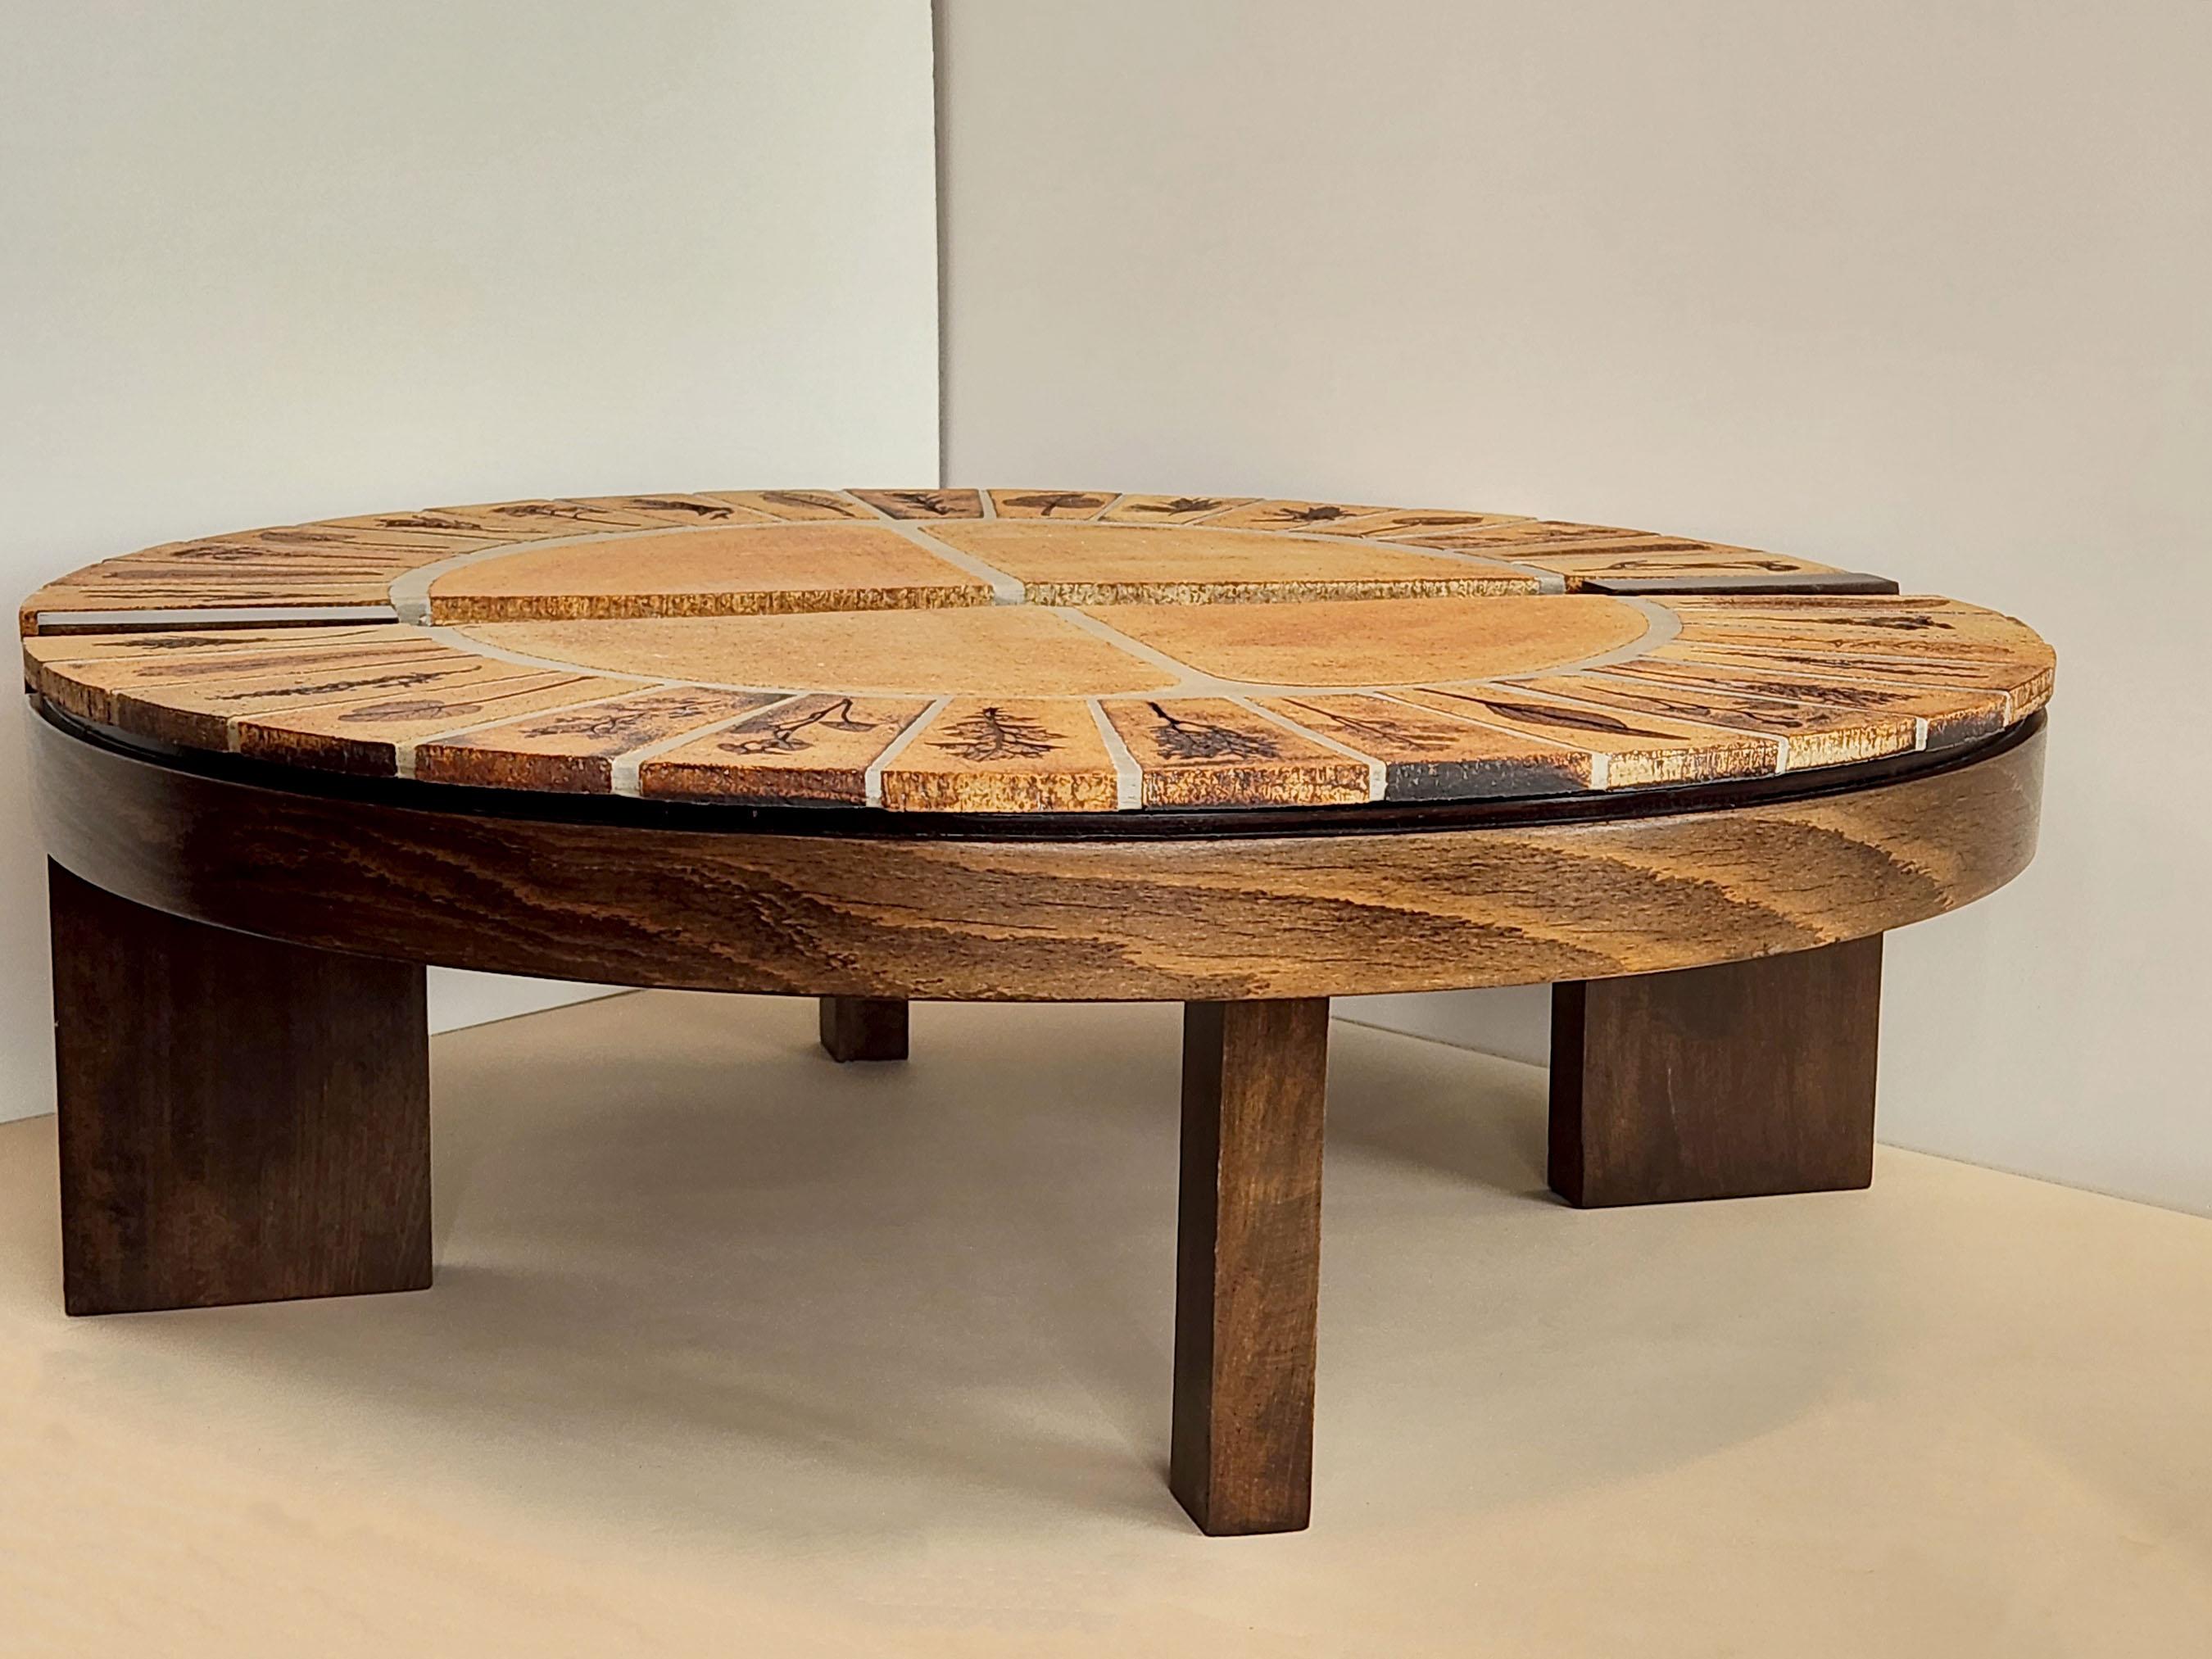 Roger Capron - Ovoid Ceramic Split Coffee Table, Garrigue Tiles, Wood Frame In Good Condition For Sale In Stratford, CT